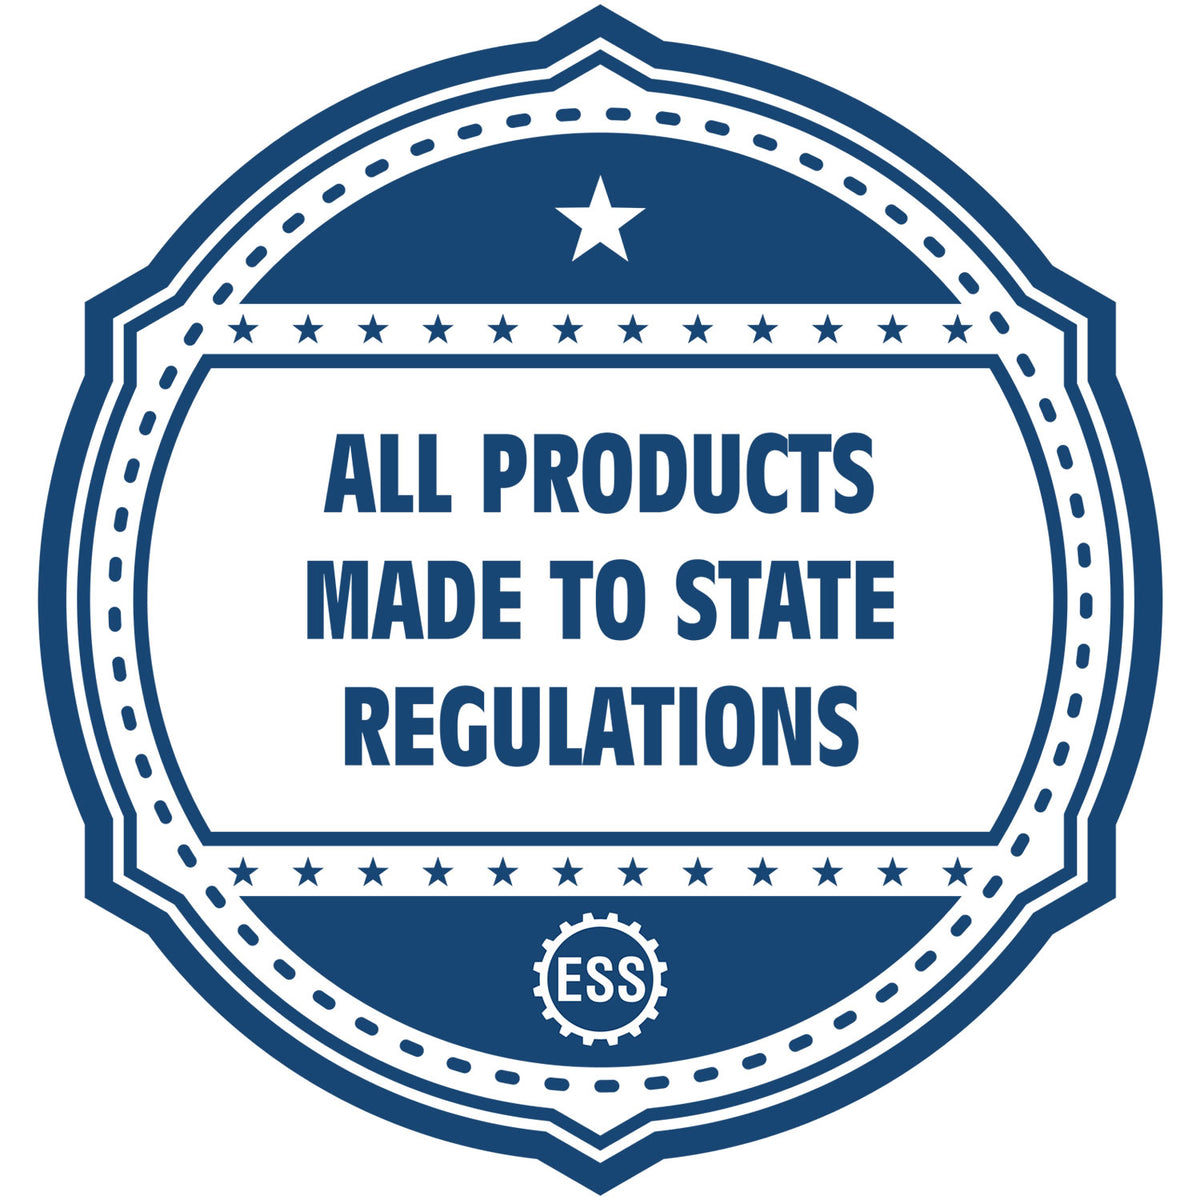 An icon or badge element for the Wooden Handle Oregon Rectangular Notary Public Stamp showing that this product is made in compliance with state regulations.